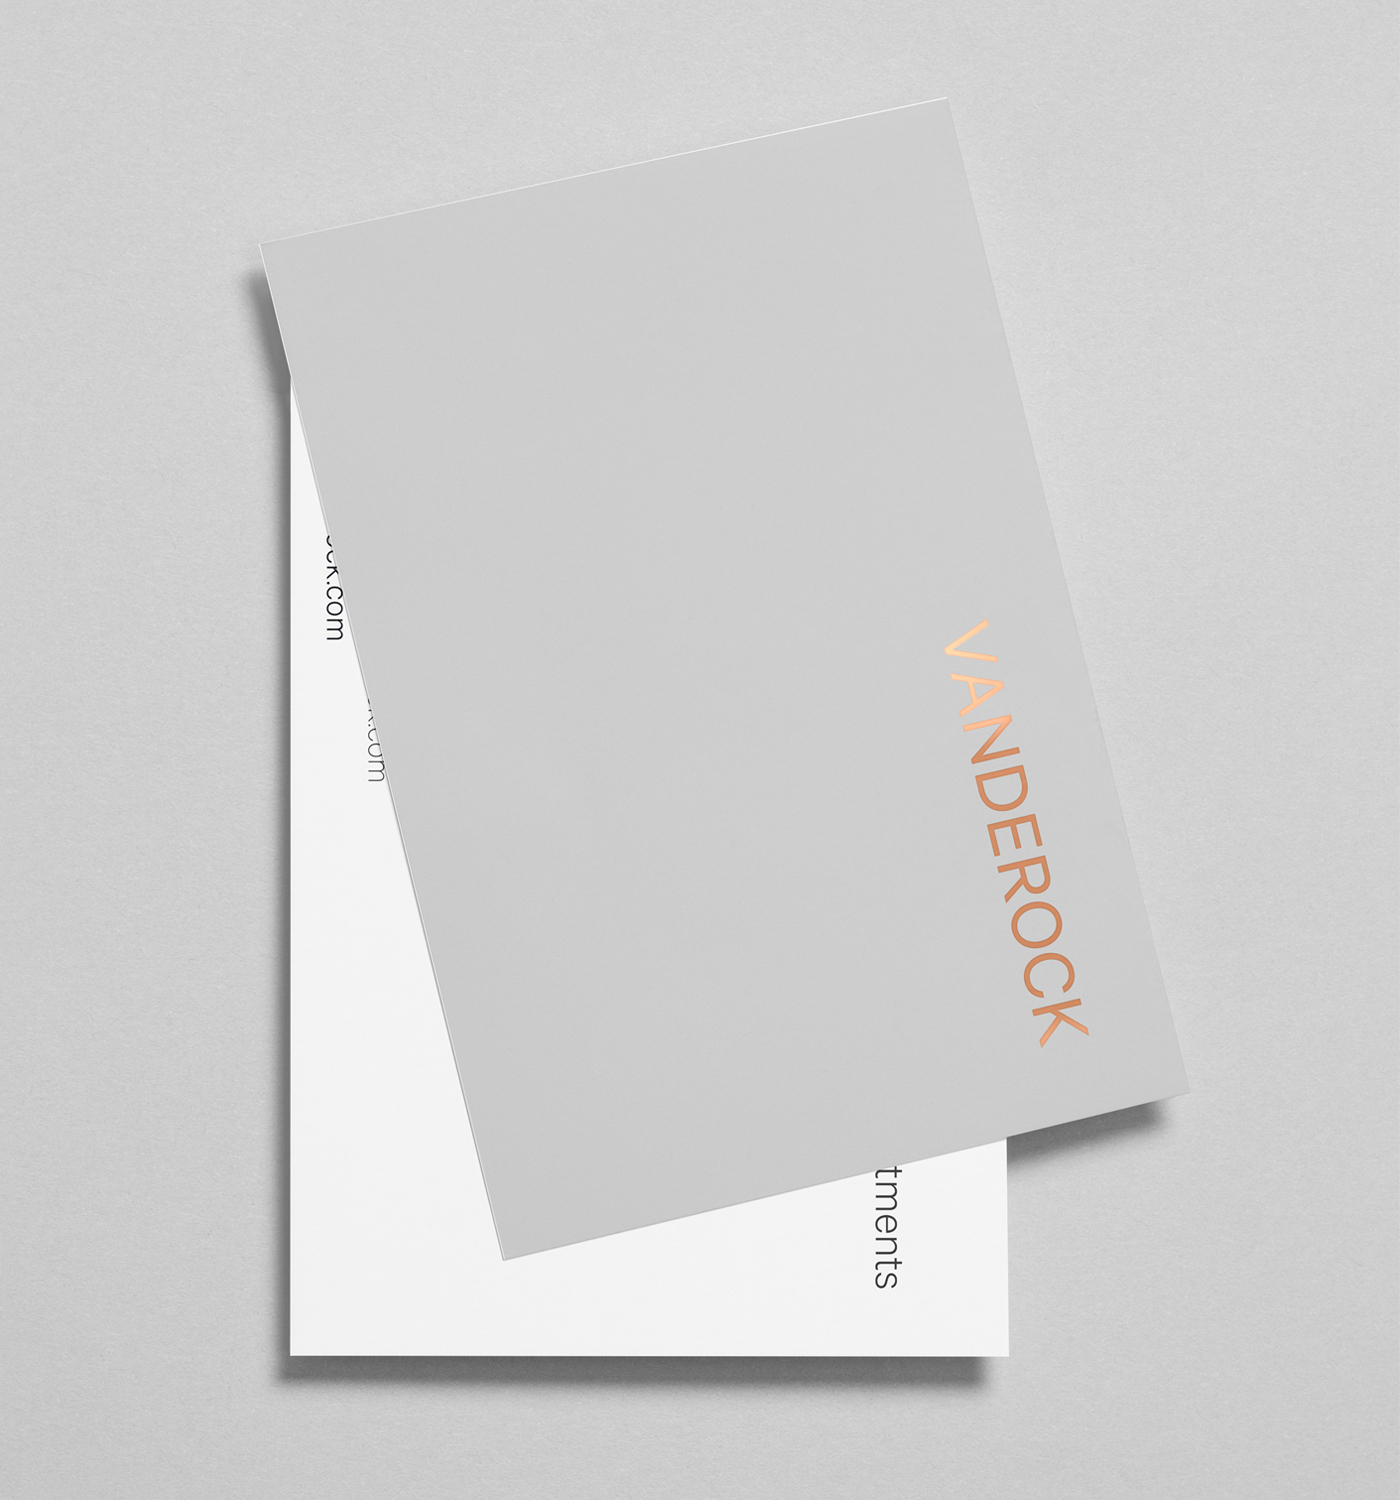 Consulting Investments corporate brandidentity clean modern simplicity miami Stationery logo Logotype copperfoil foil letterpress